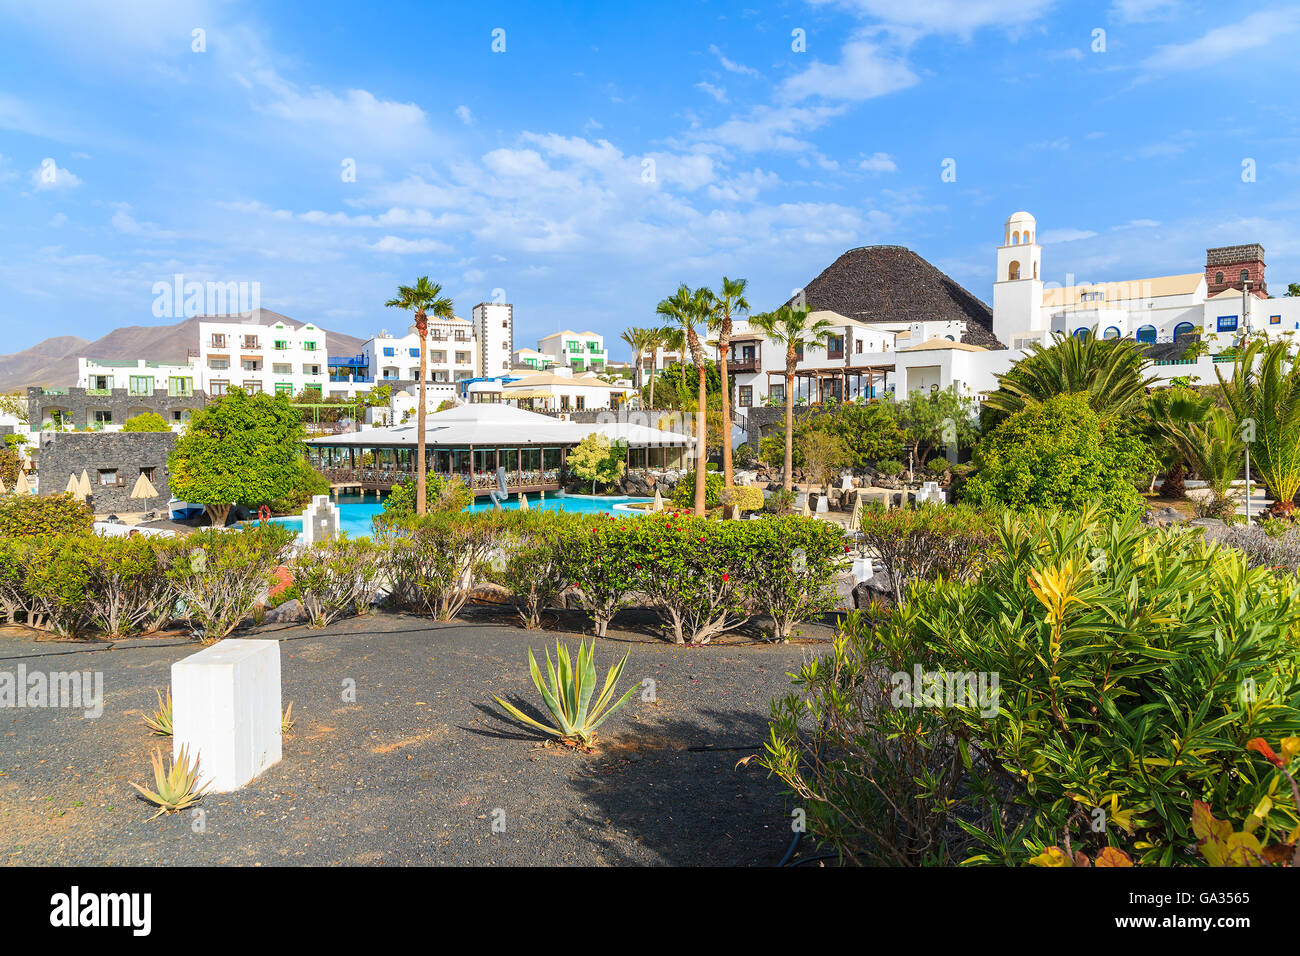 MARINA RUBICON, LANZAROTE ISLAND - JAN 11, 2015: Volcan hotel garden with villas in Rubicon marina, which is a part of Playa Blanca holiday resort town. Canary Islands are popular holiday destination. Stock Photo